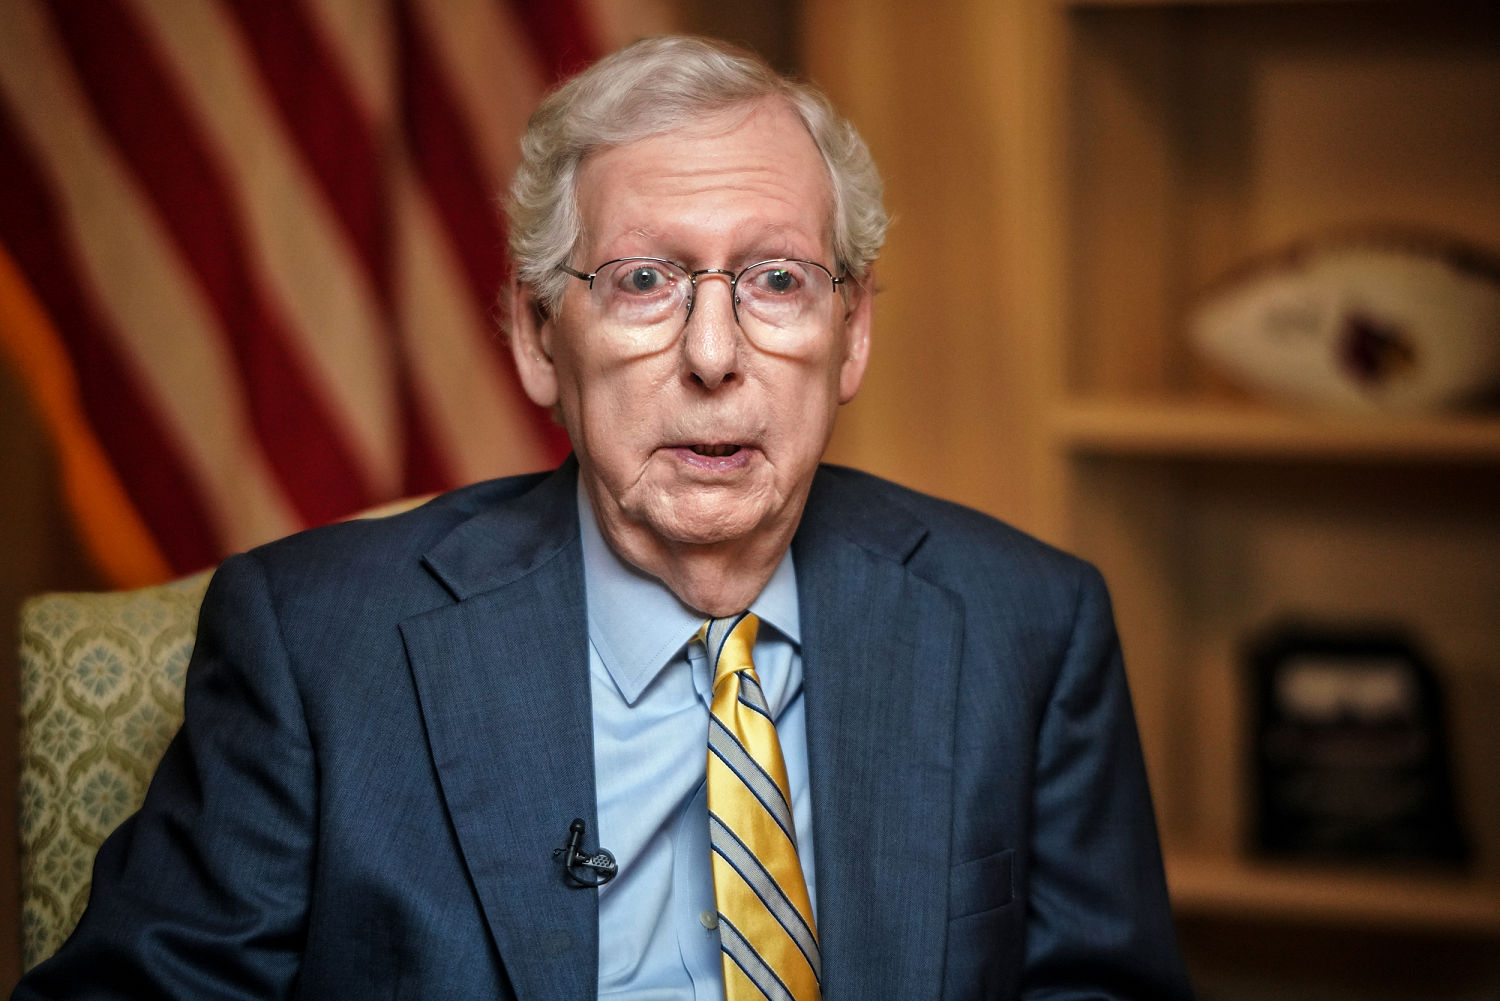 Mitch McConnell says presidents shouldn’t be immune from prosecution